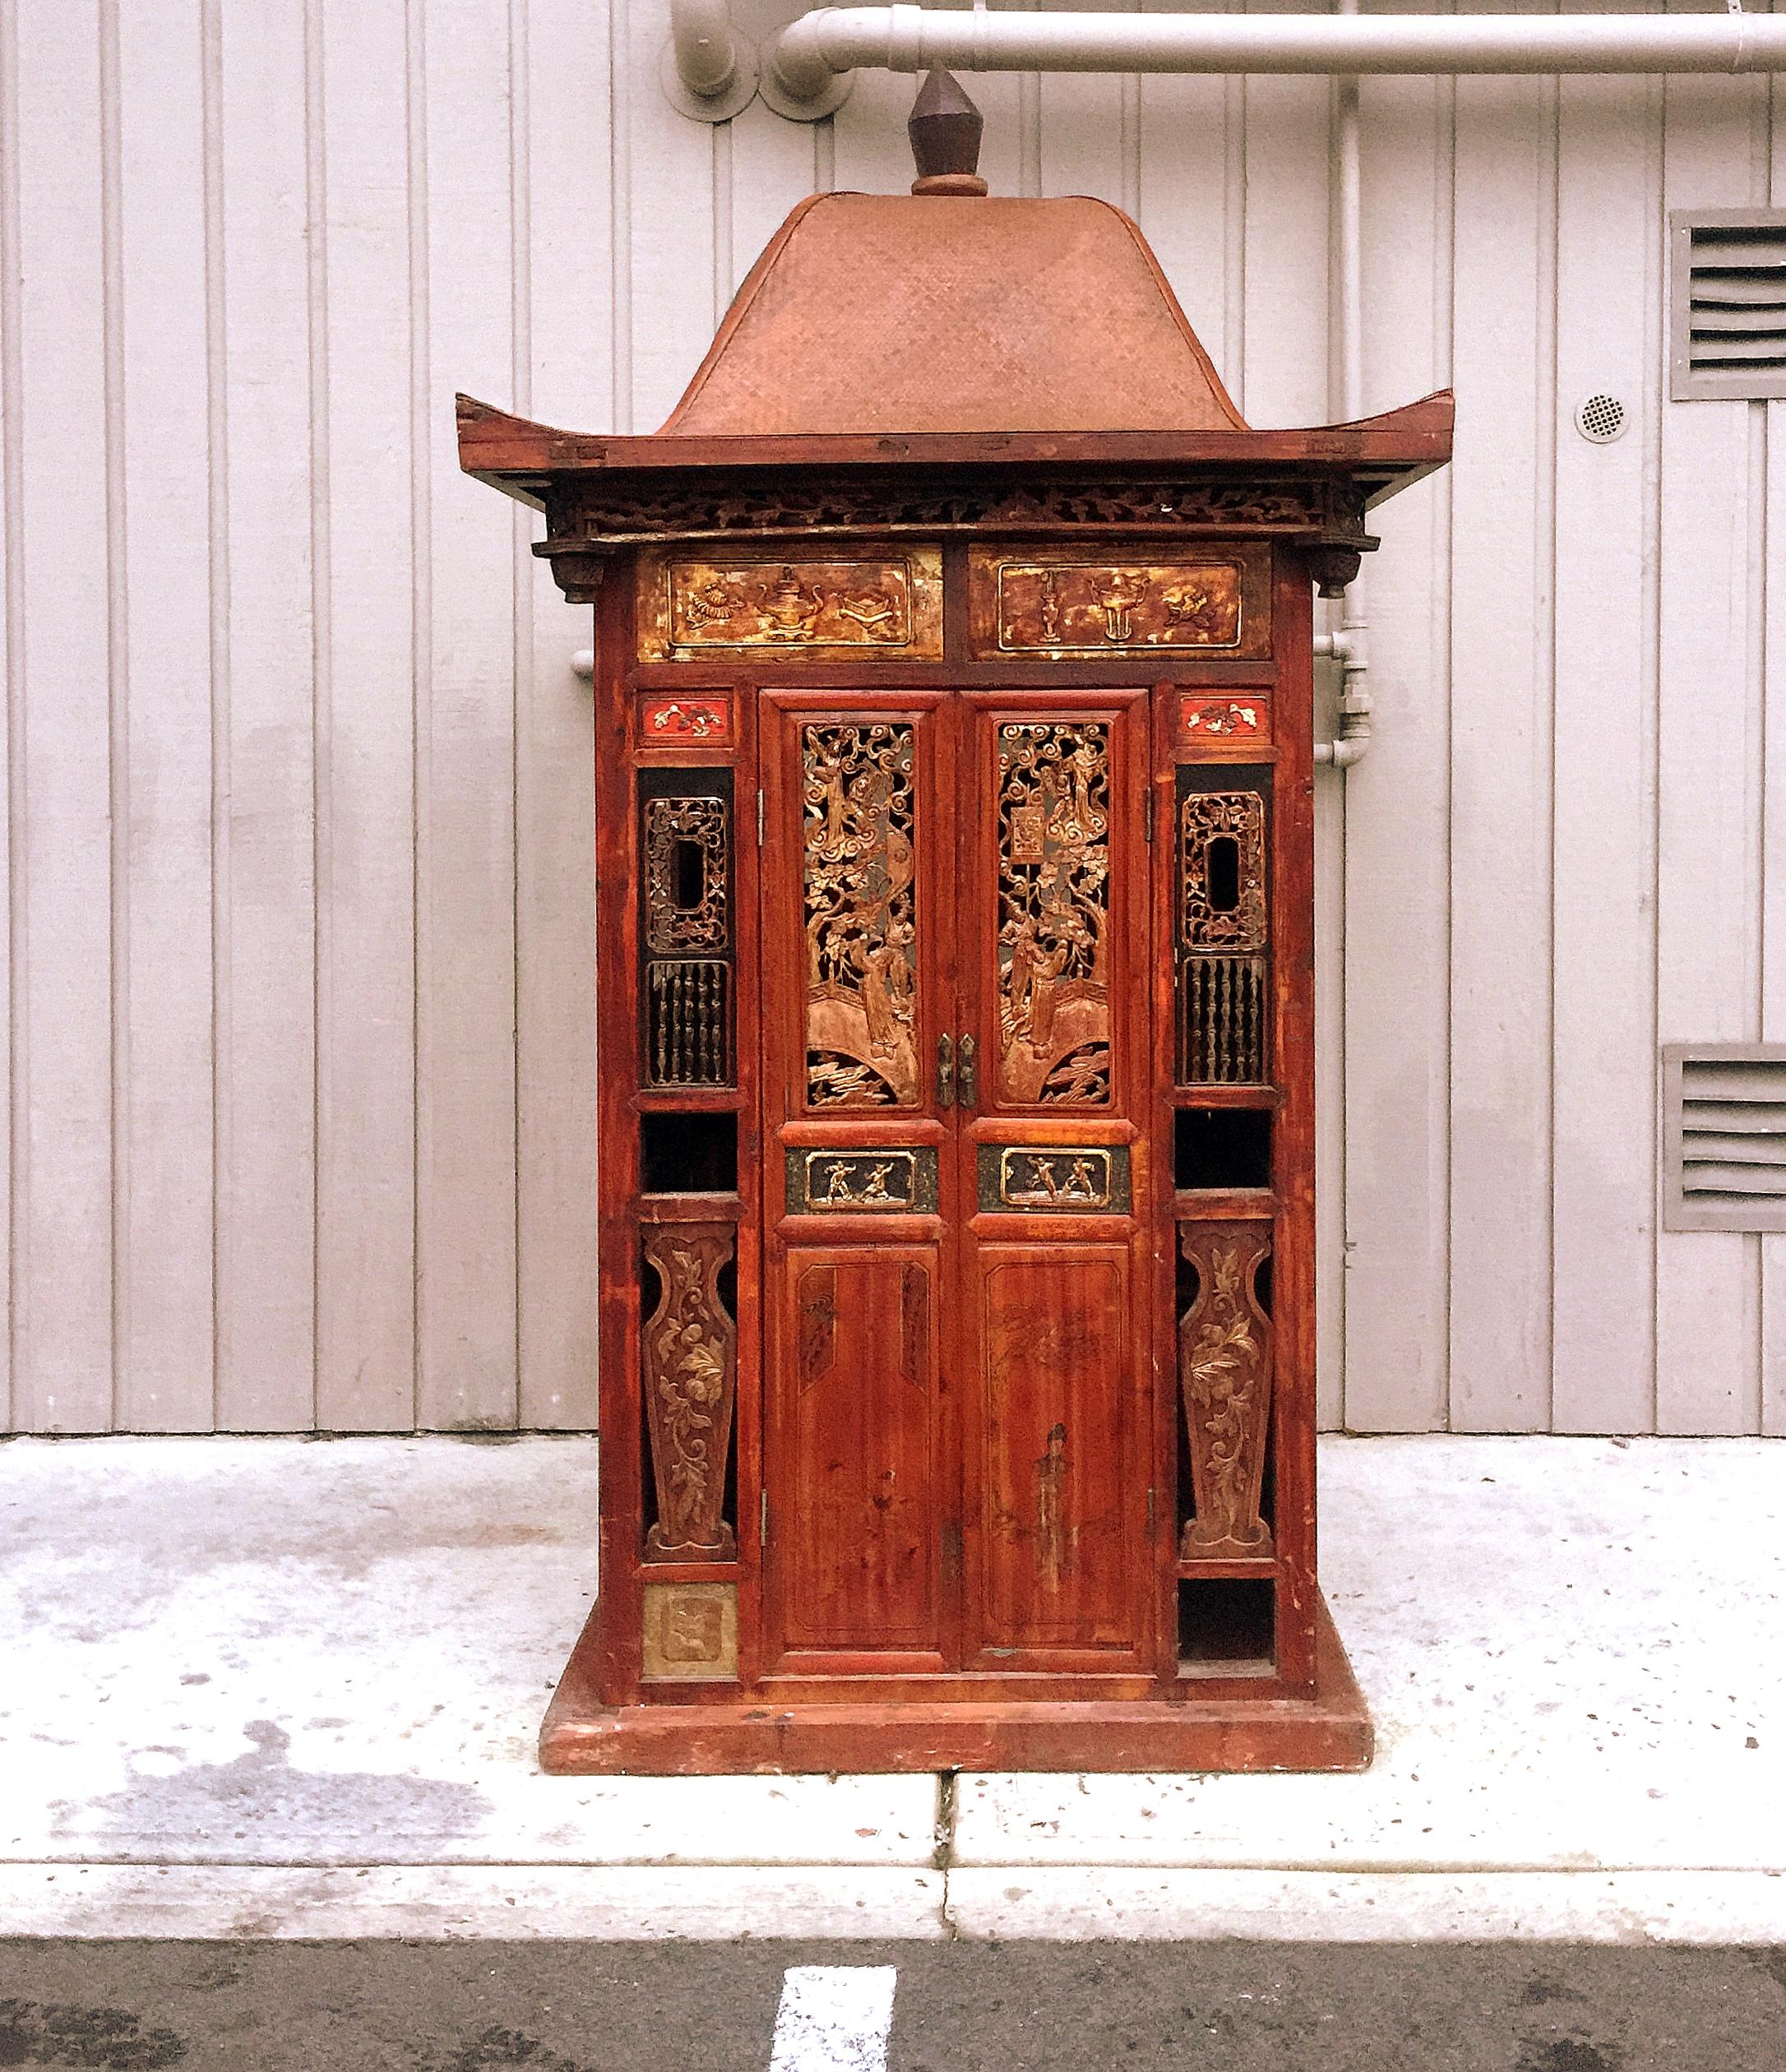 Chinese wedding sedan chair, very fine and great detail carving on all sides, a work of art. Does not come with poles.